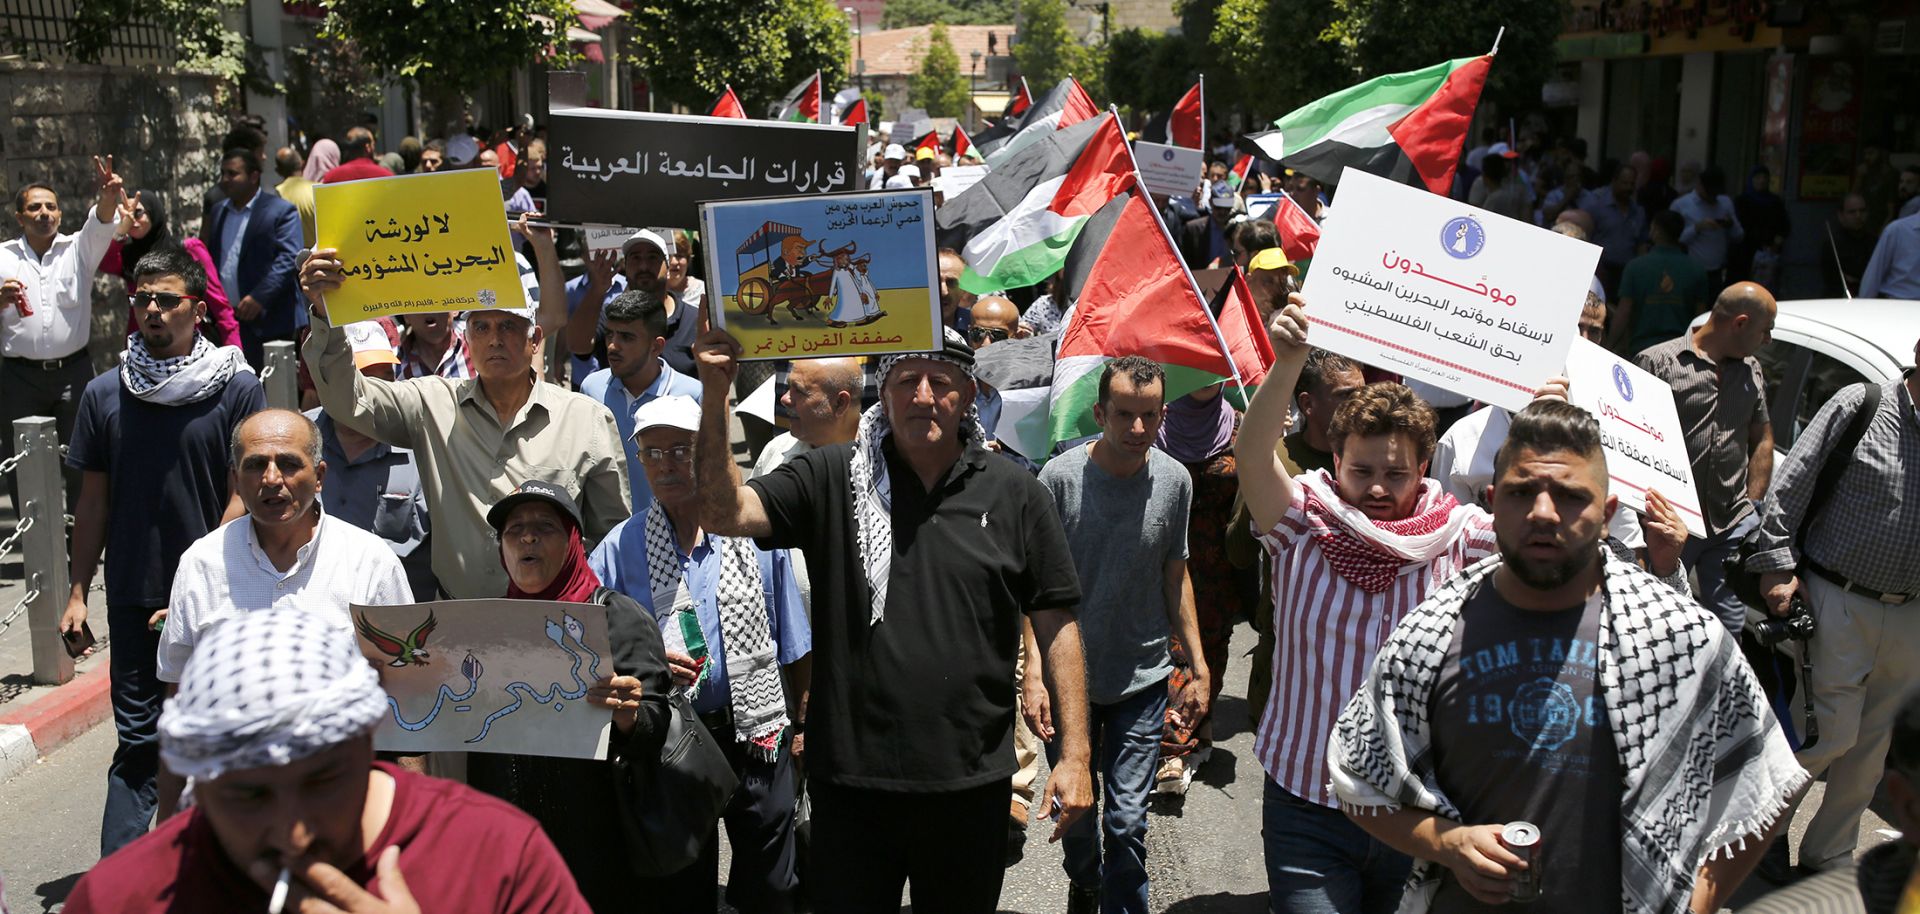 Demonstrators opposed to the U.S.-led plan for Israeli-Palestinian peace march through Ramallah in the West Bank on June 24.